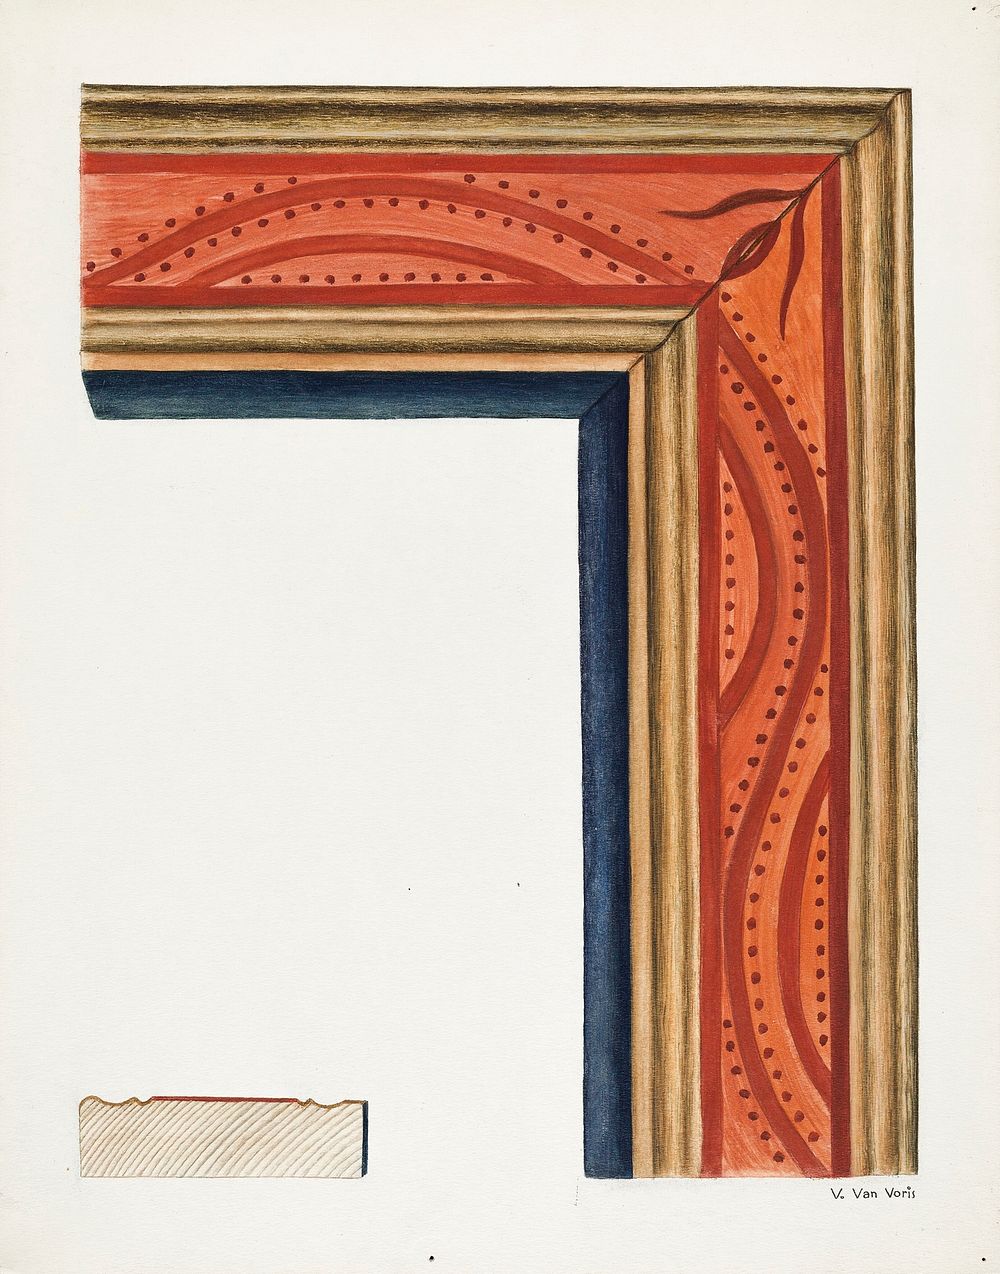 Hand&ndash;carved Picture Frame "River of Life" Motif (ca. 1938) by Vera Van Voris. Original from The National Gallery of…